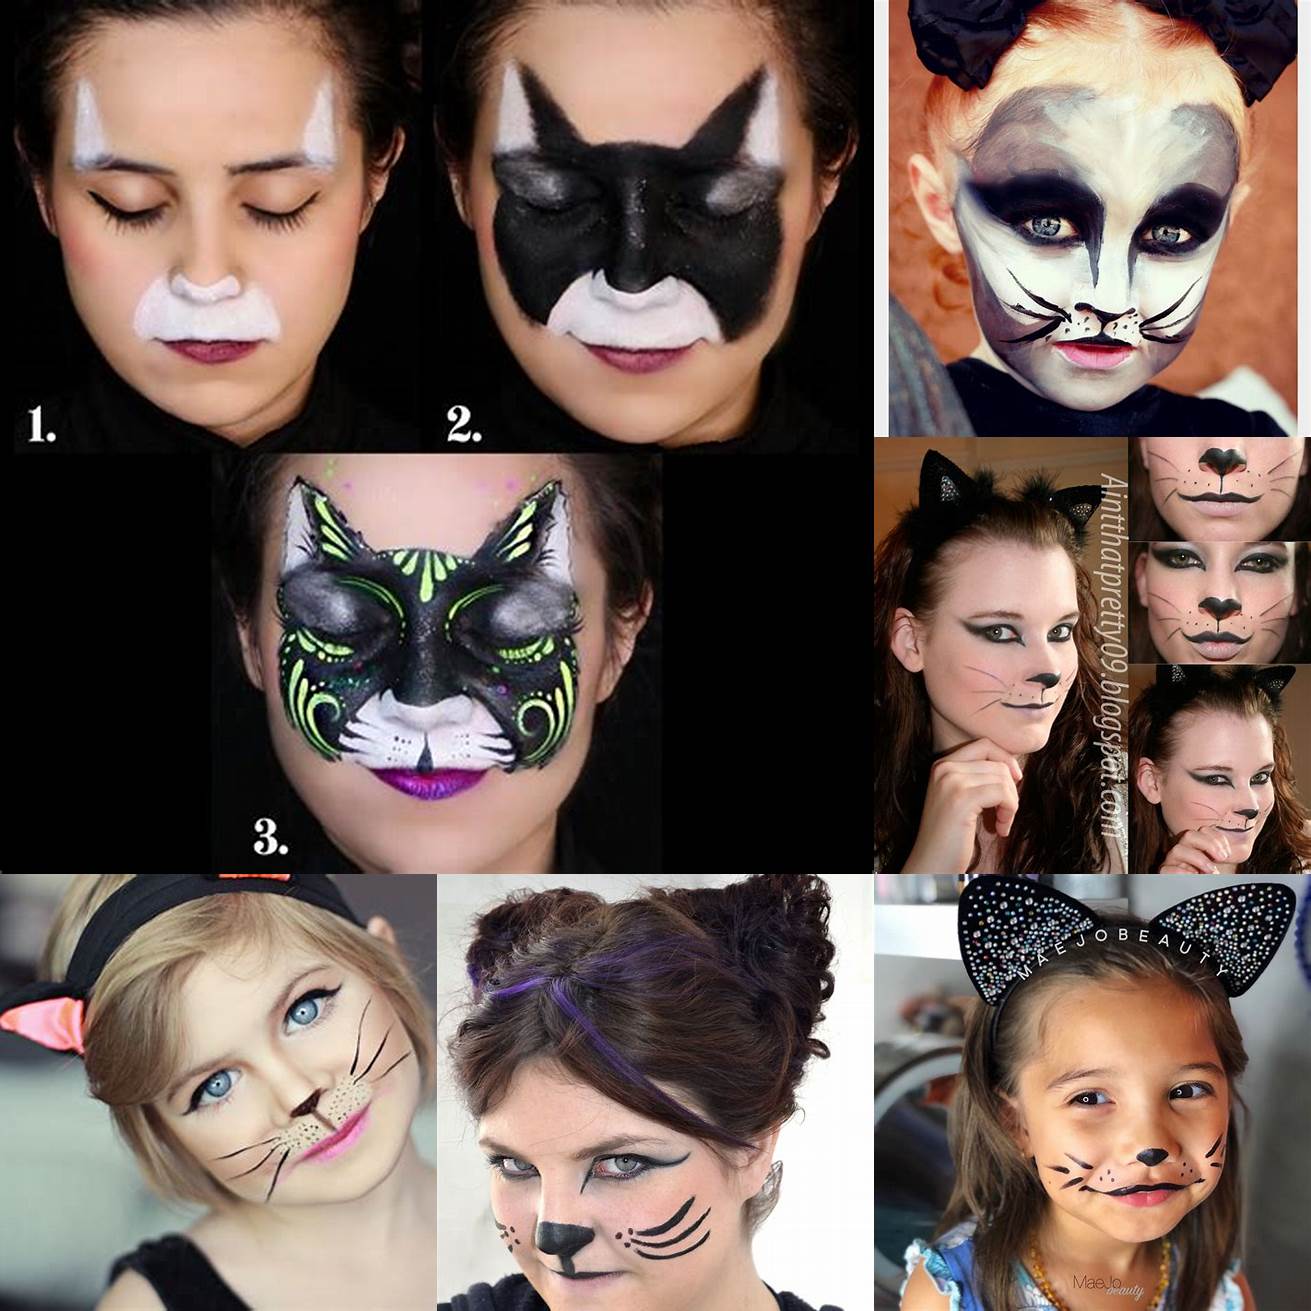 Use black face paint to create the Cats distinctive features